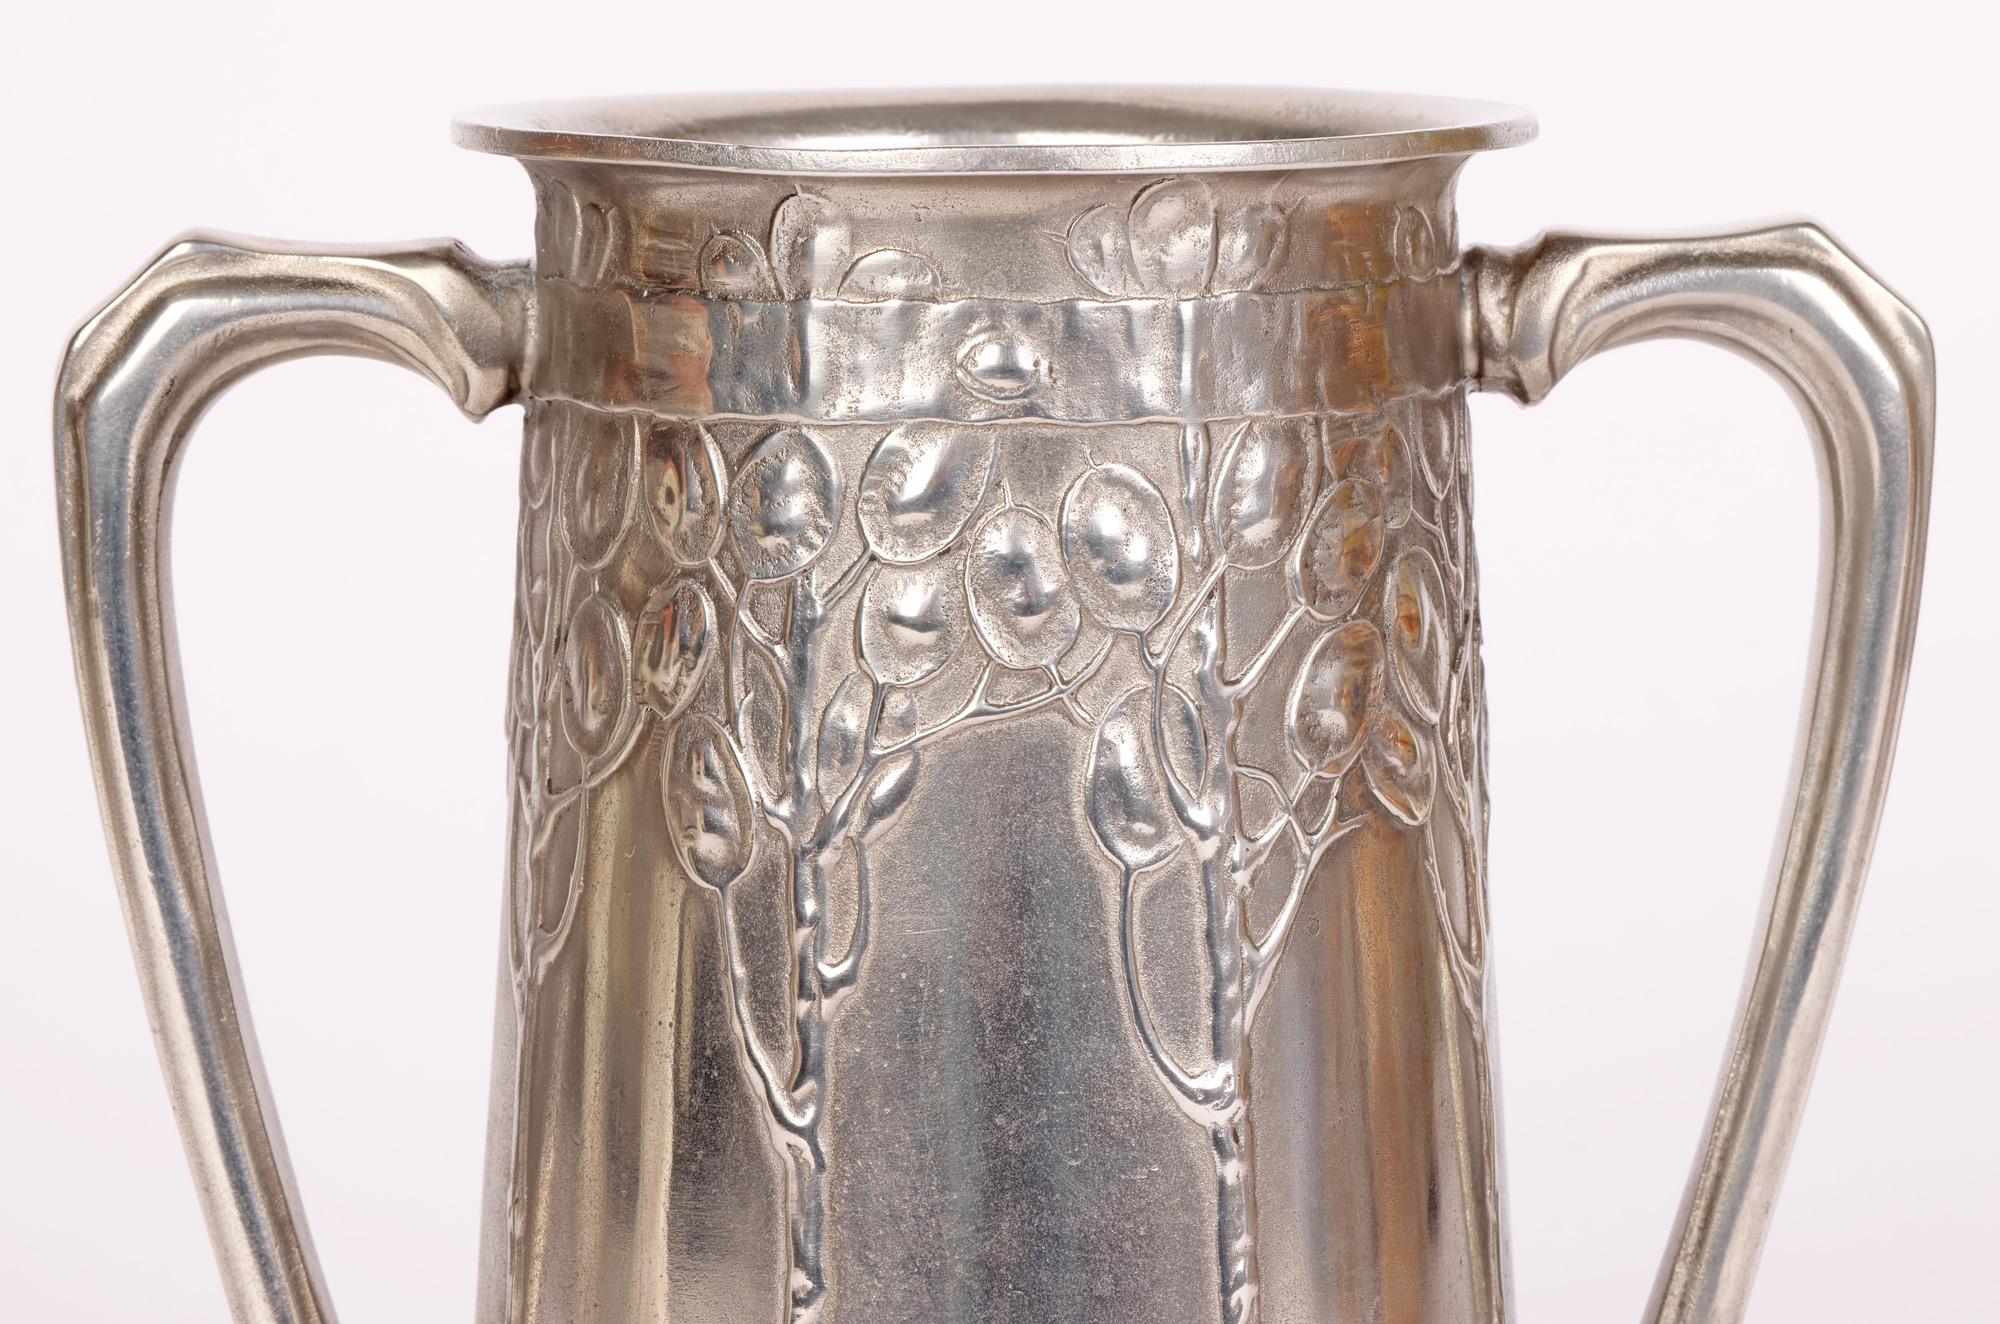 A stylish art nouveau Tudric pewter twin handled loving cup titled ‘FOR OLD TIMES SAKE’ designed by renowned designer David Veasey (British, active c.1900-1920) and dating from around 1902. 

This piece was produced by Liberty & Co and is of tall